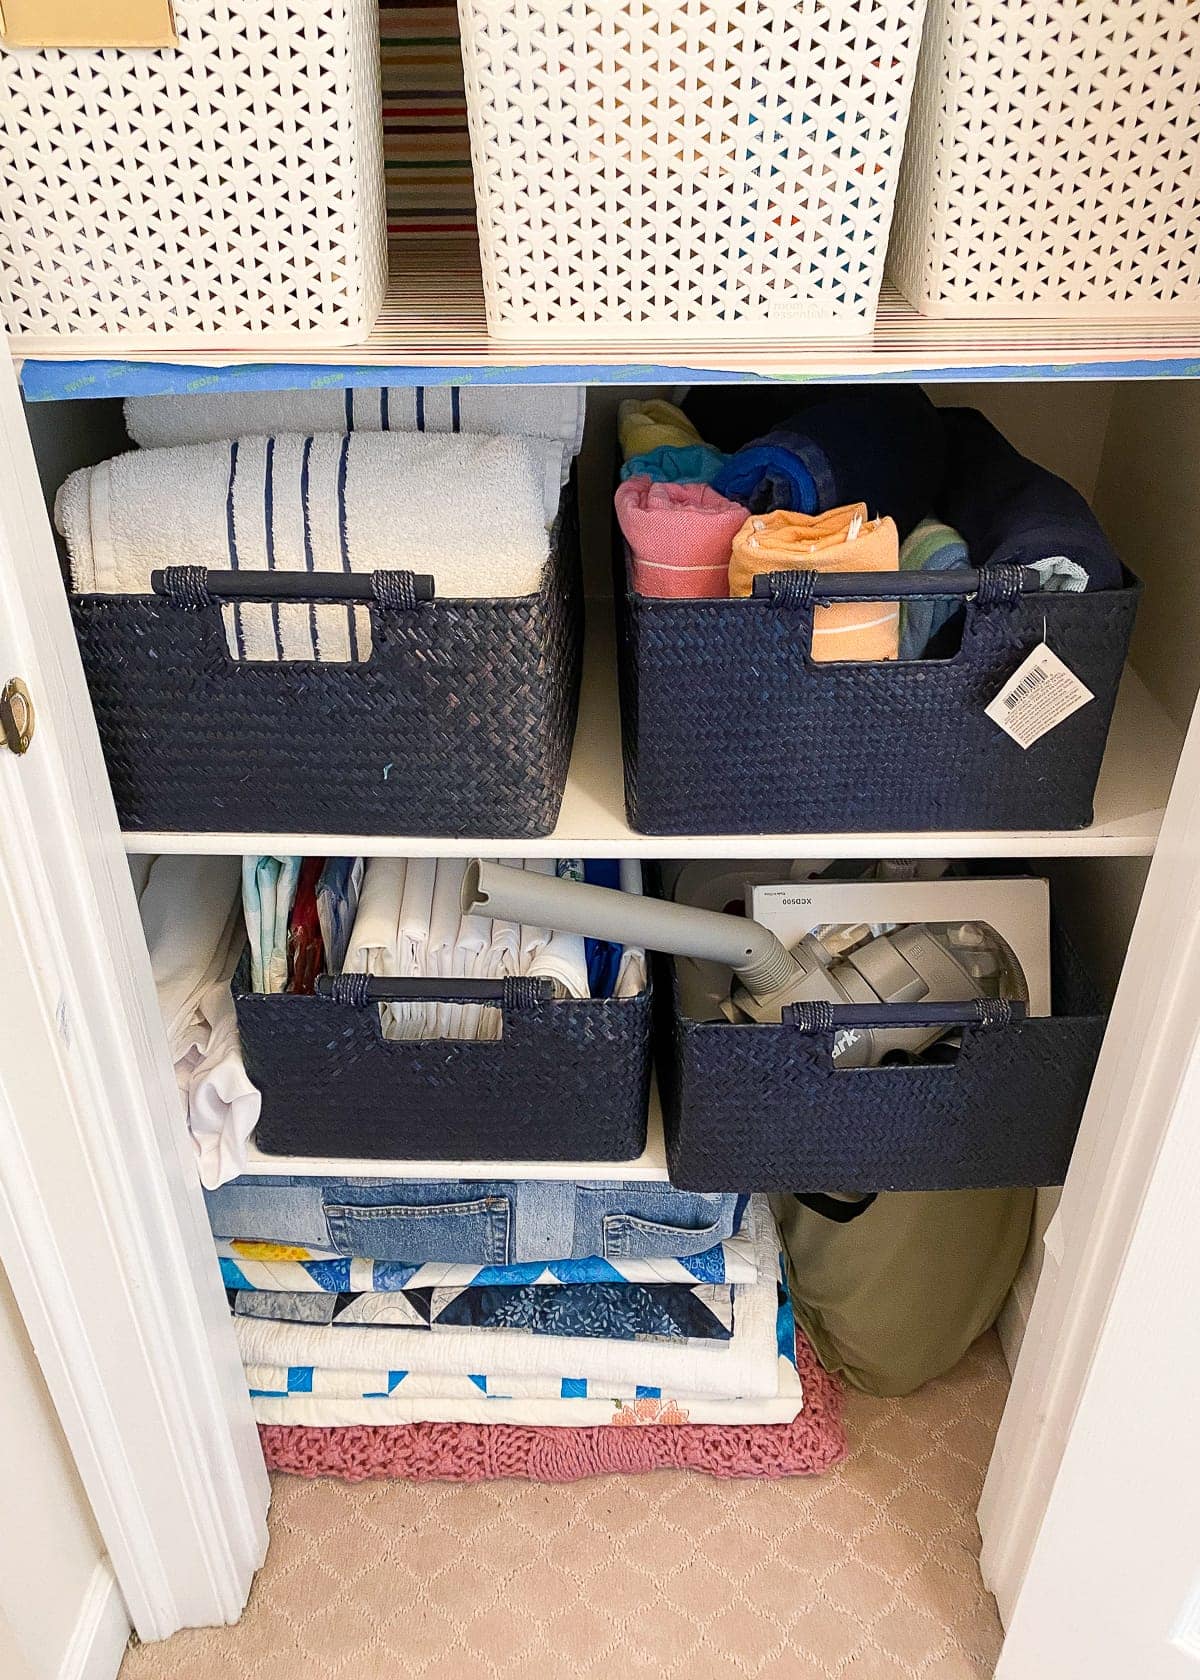 https://thehomesihavemade.com/practical-tips-for-organizing-a-linen-closet_before_6/